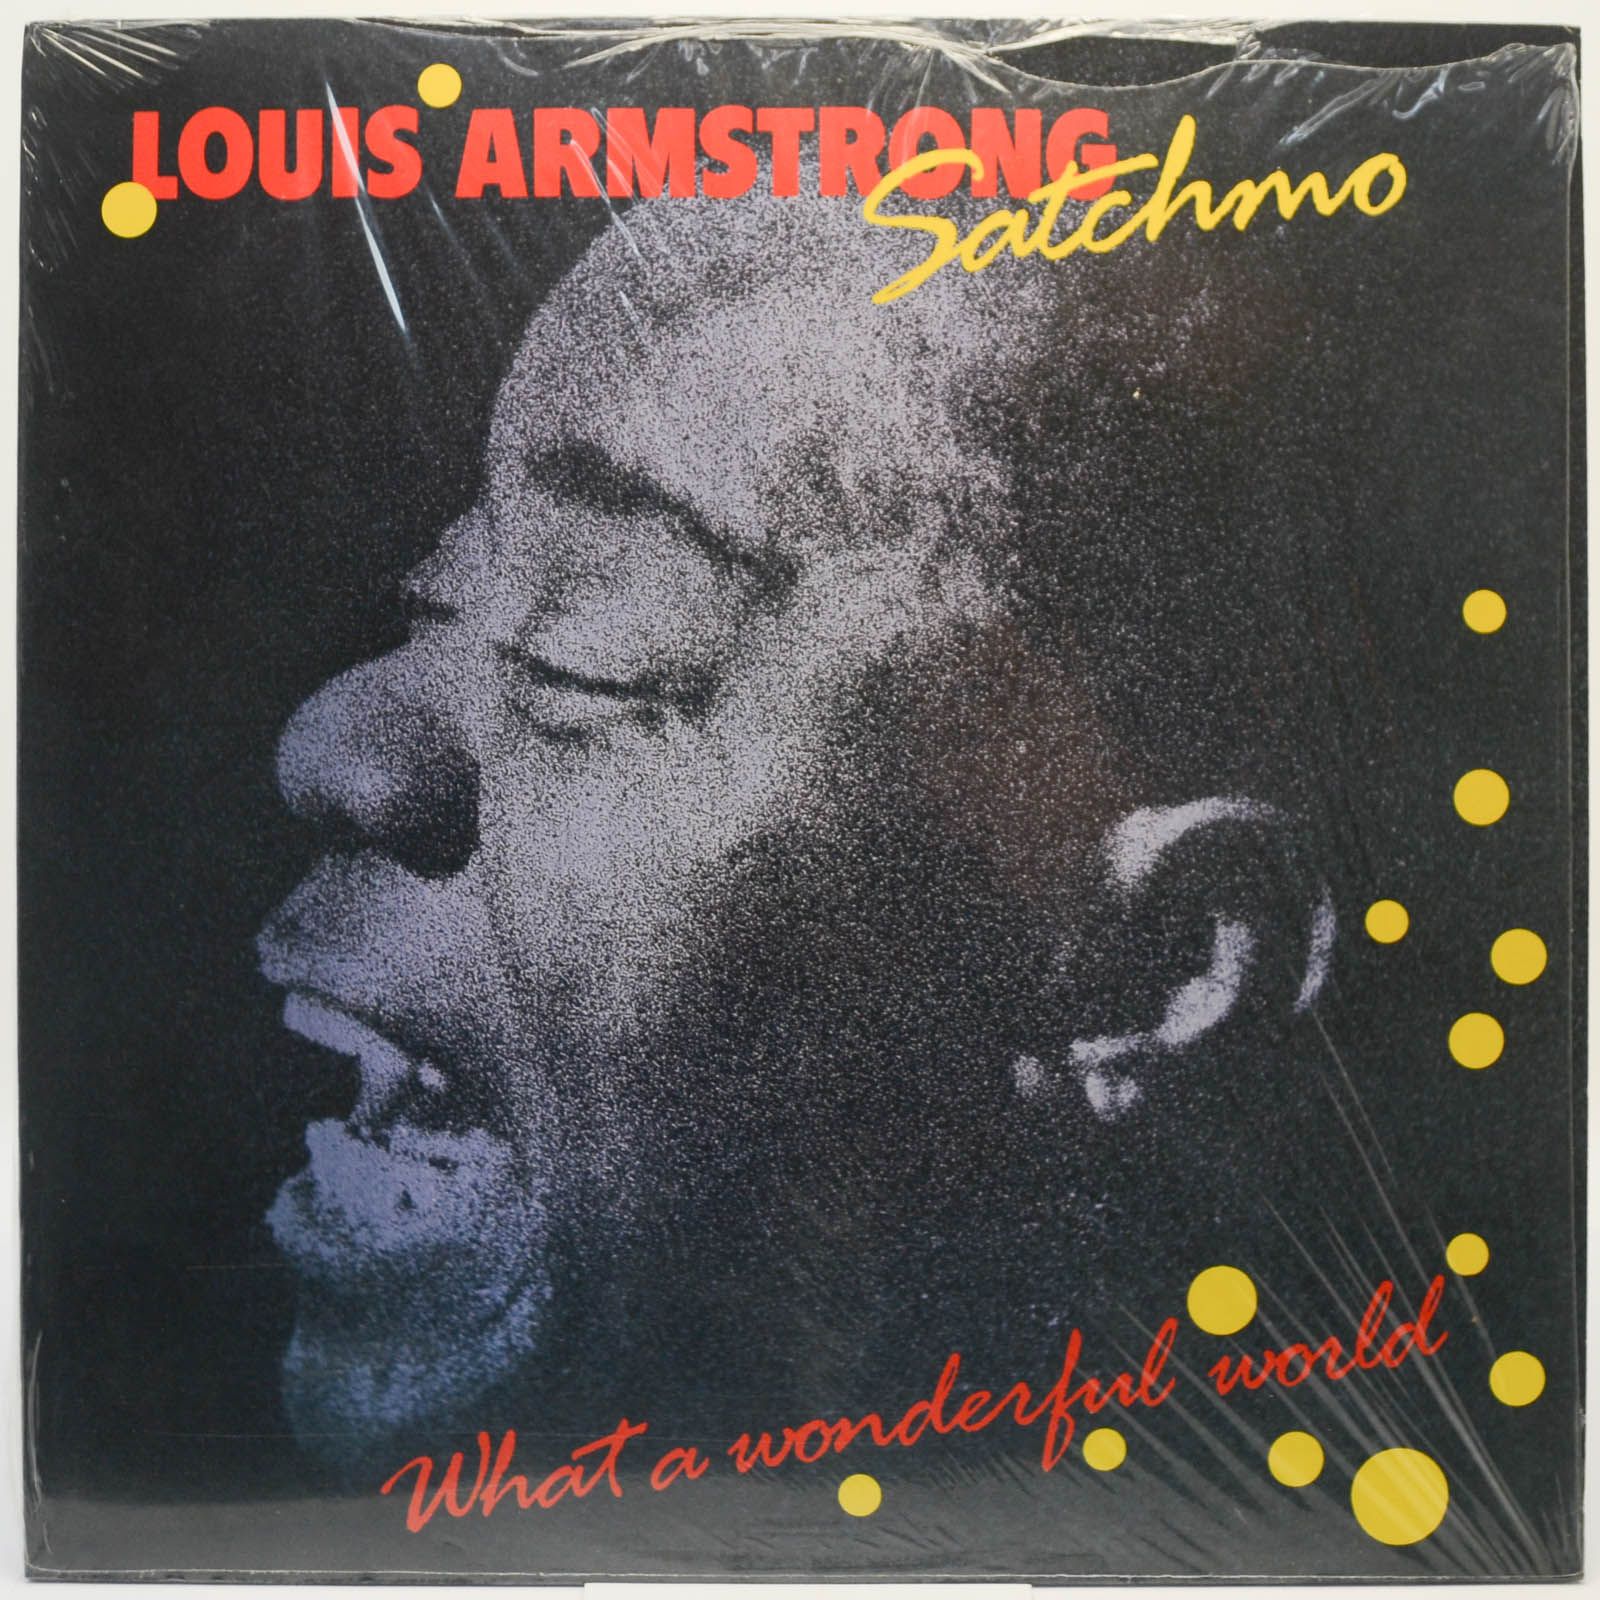 Louis Armstrong — Satchmo - What A Wonderful World, 1988